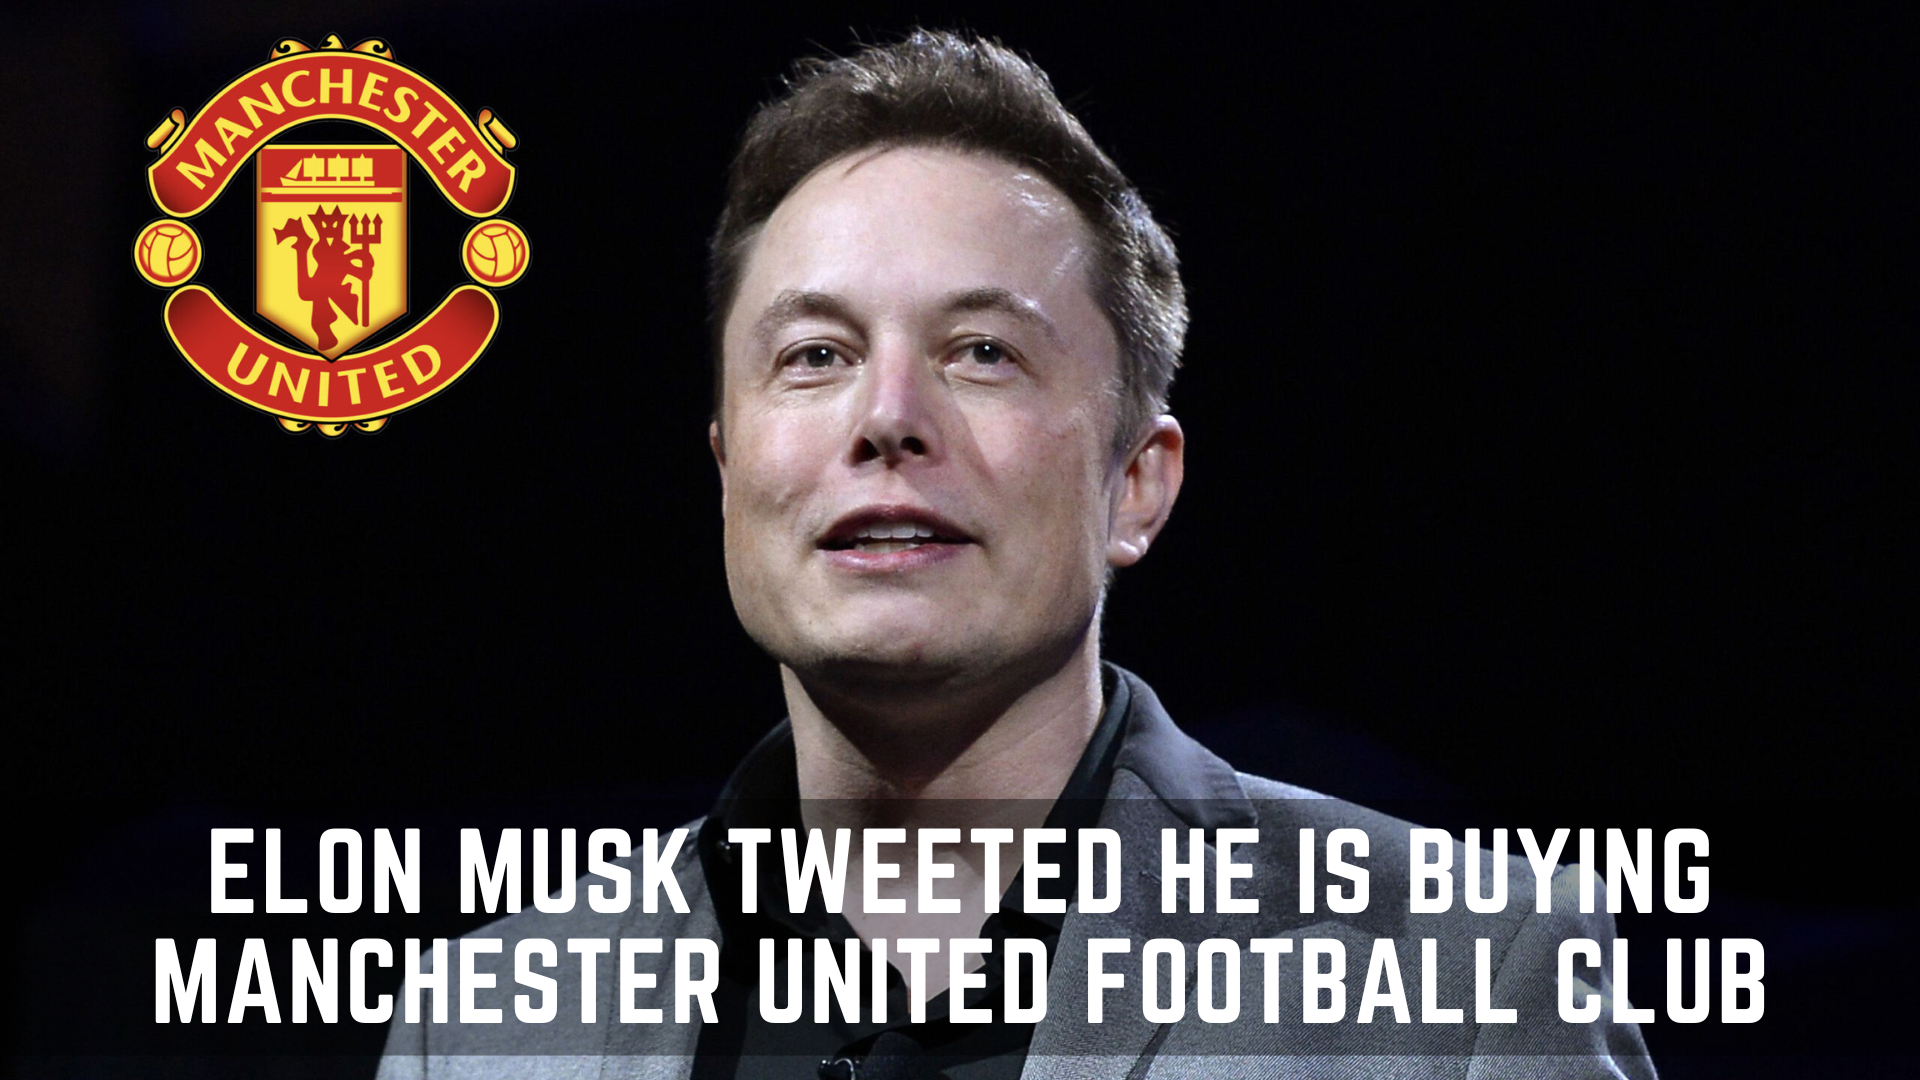 Elon Musk Tweeted He Is Buying Manchester United Football Club